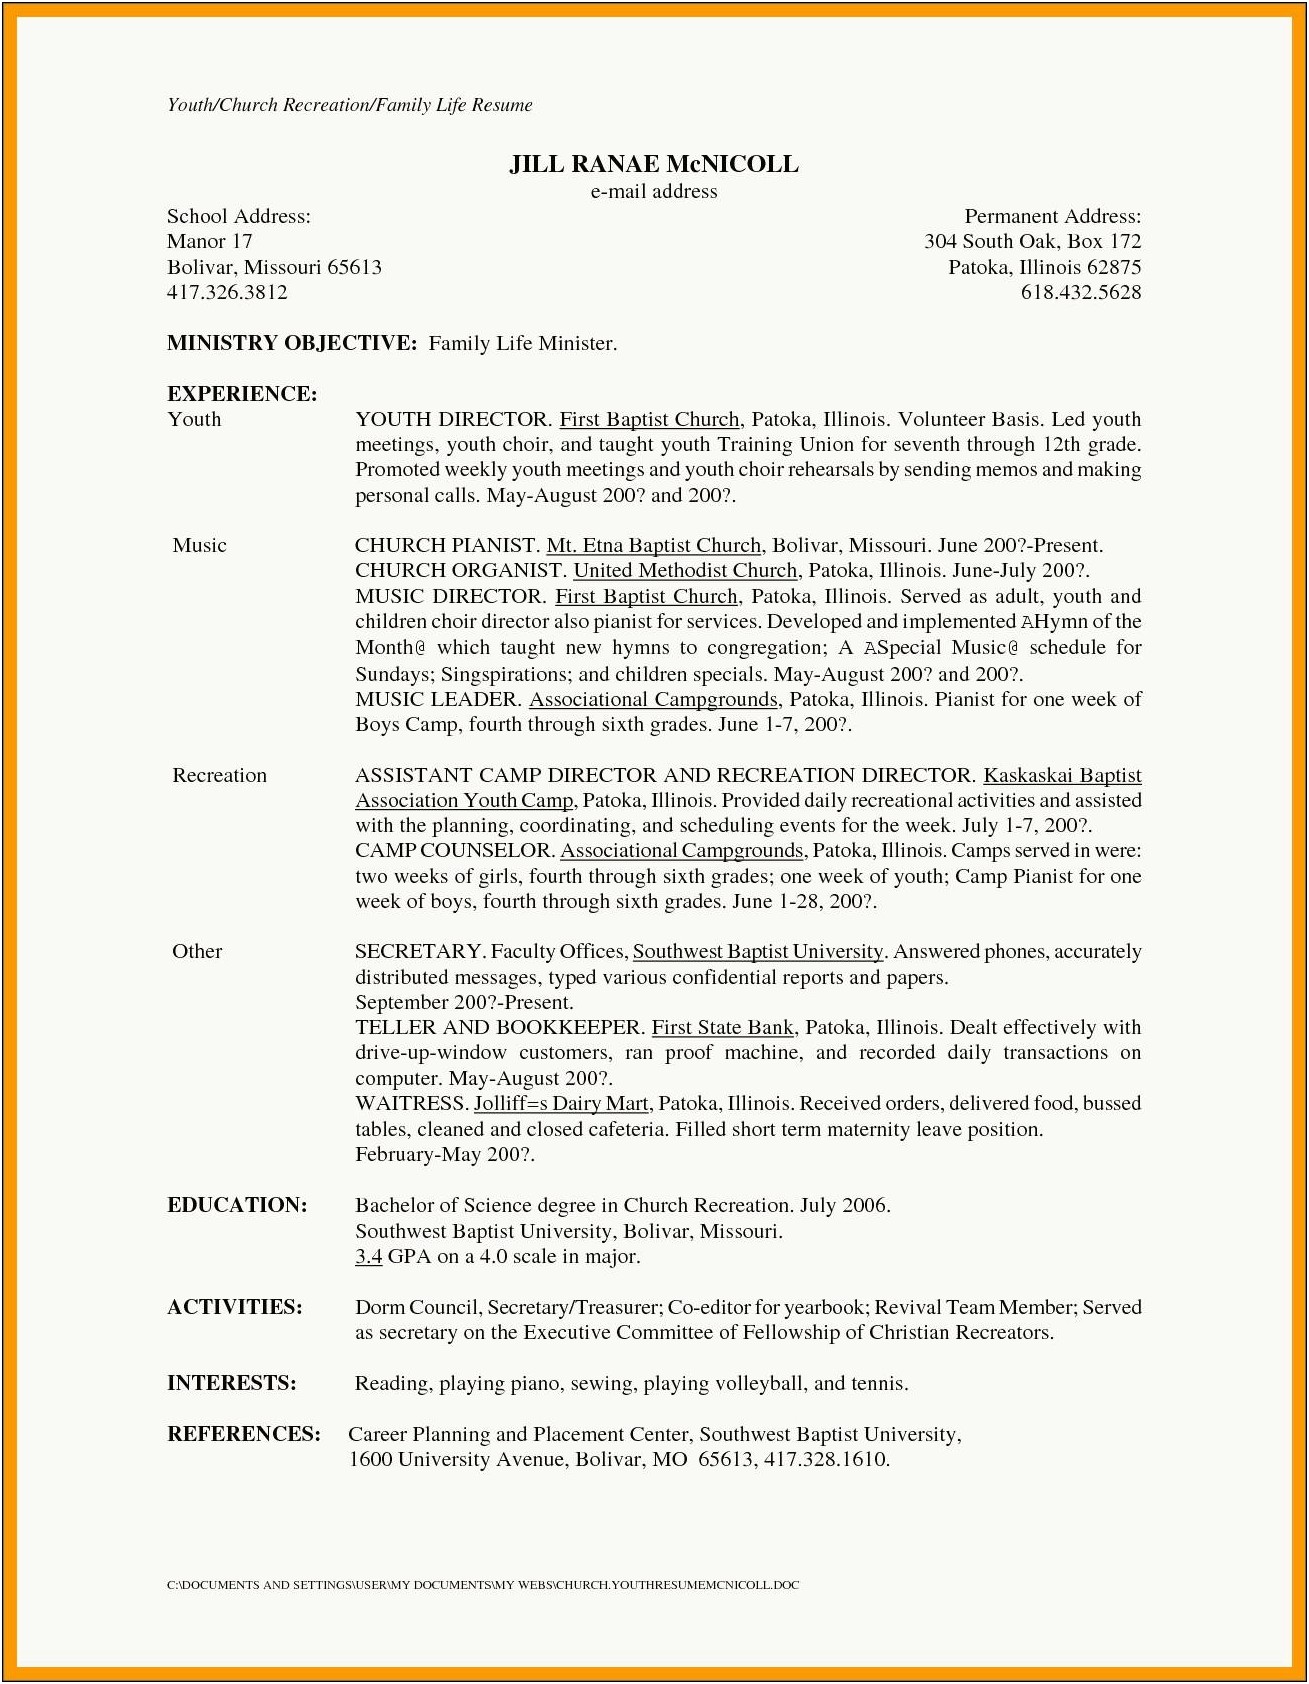 Human Resources Sample Resume Objectives